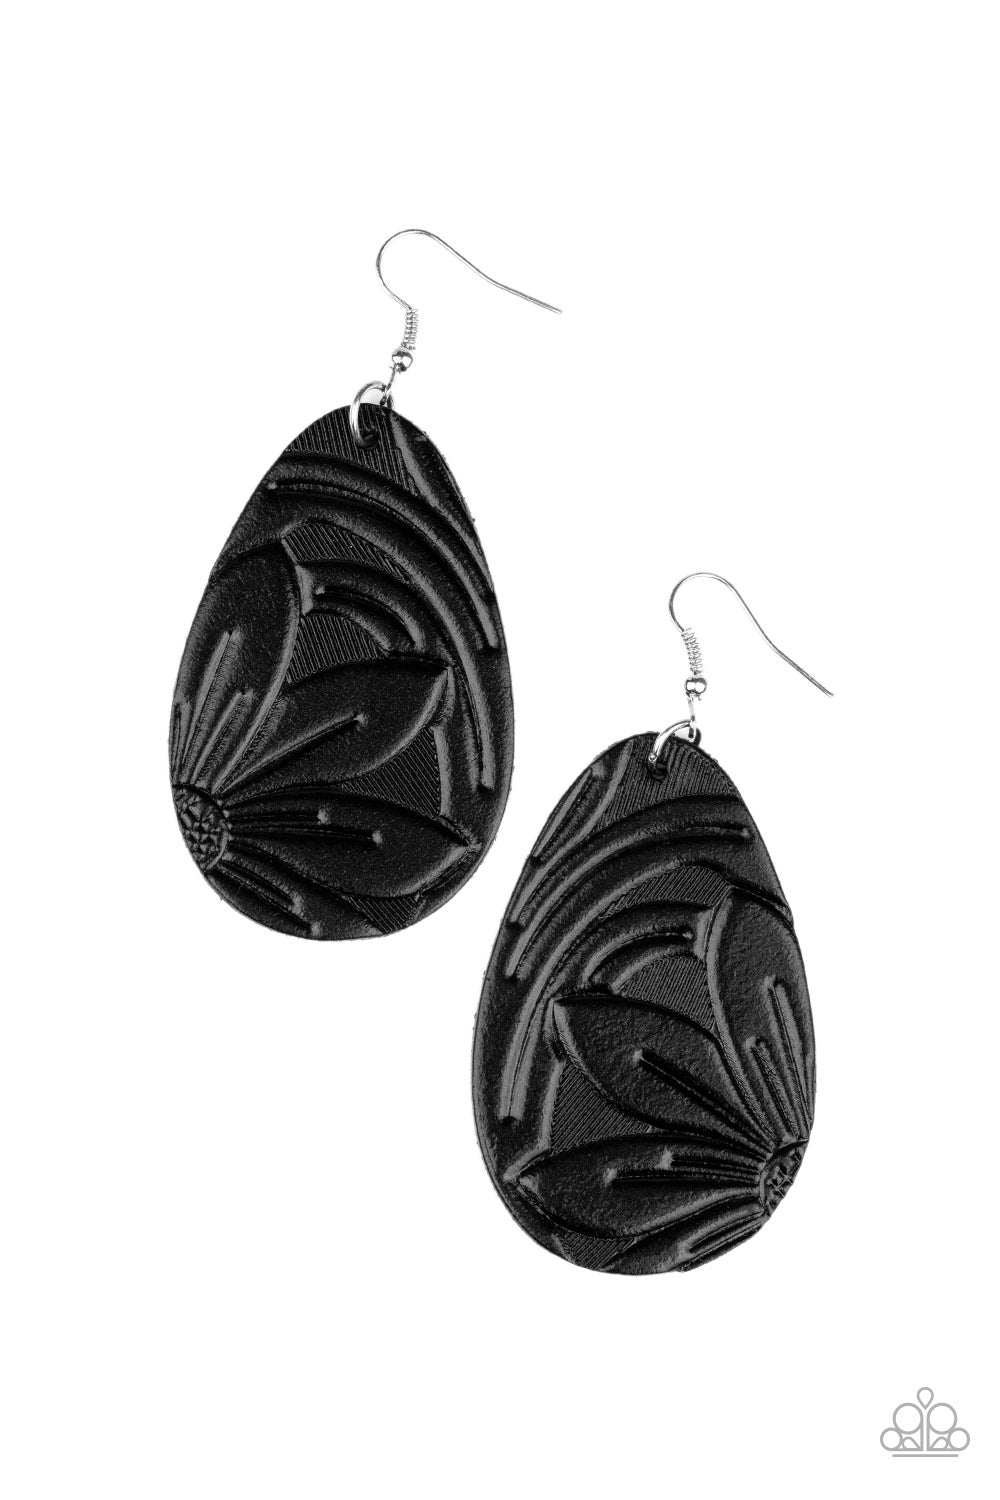 Paparazzi Accessories Garden Therapy - Black Earrings - Lady T Accessories